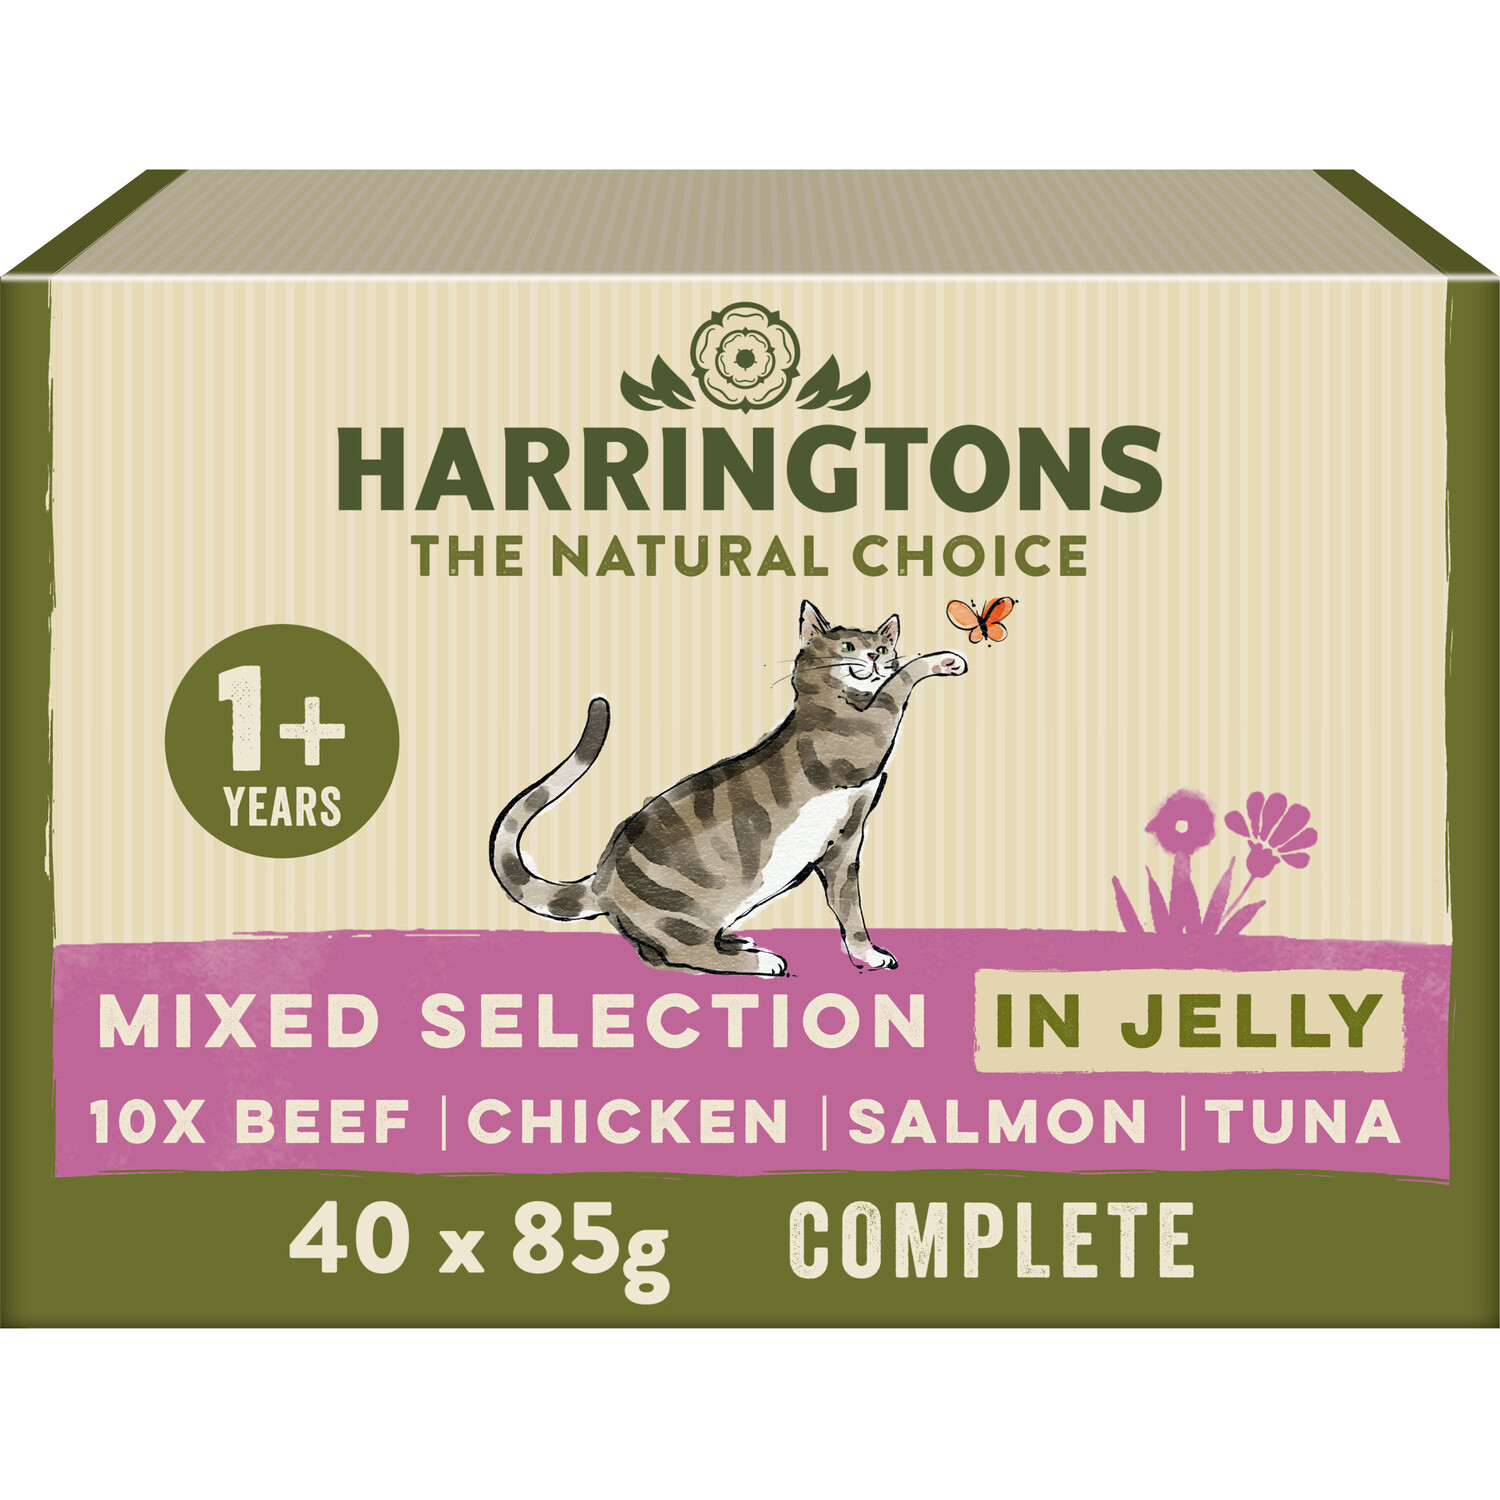 Harringtons Mixed Selection in Jelly Wet Cat Food 85g 40 Pack Image 1